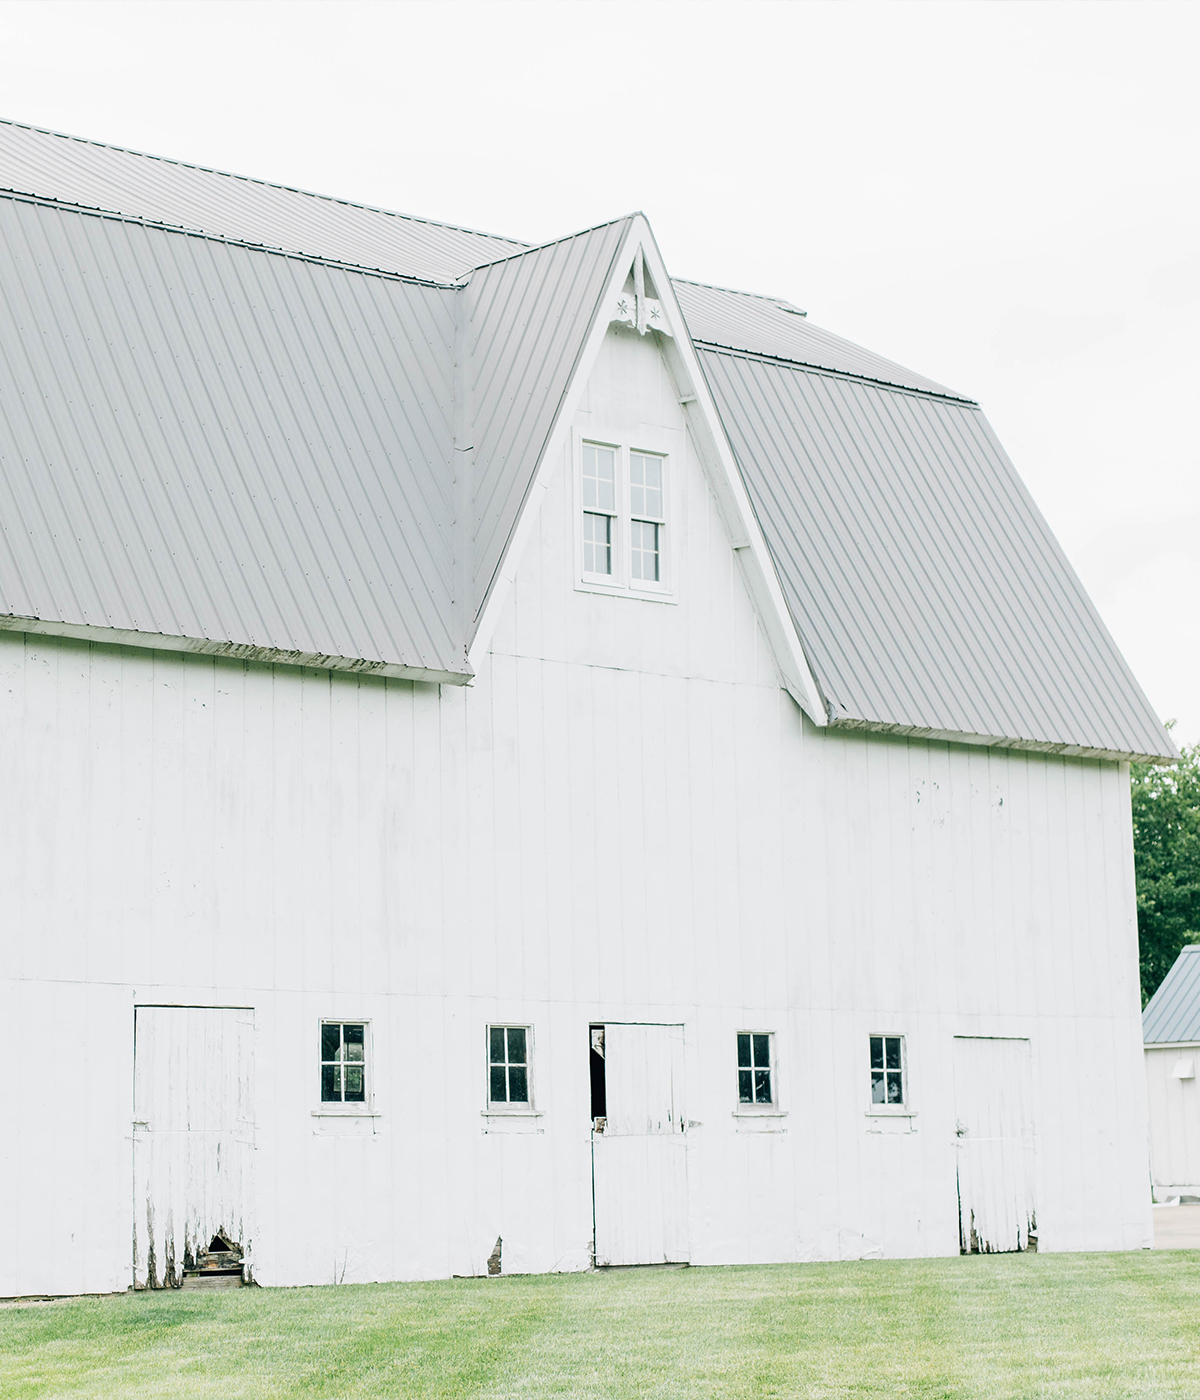 Weddings & Events at Haven on the Farm | Peoria, IL